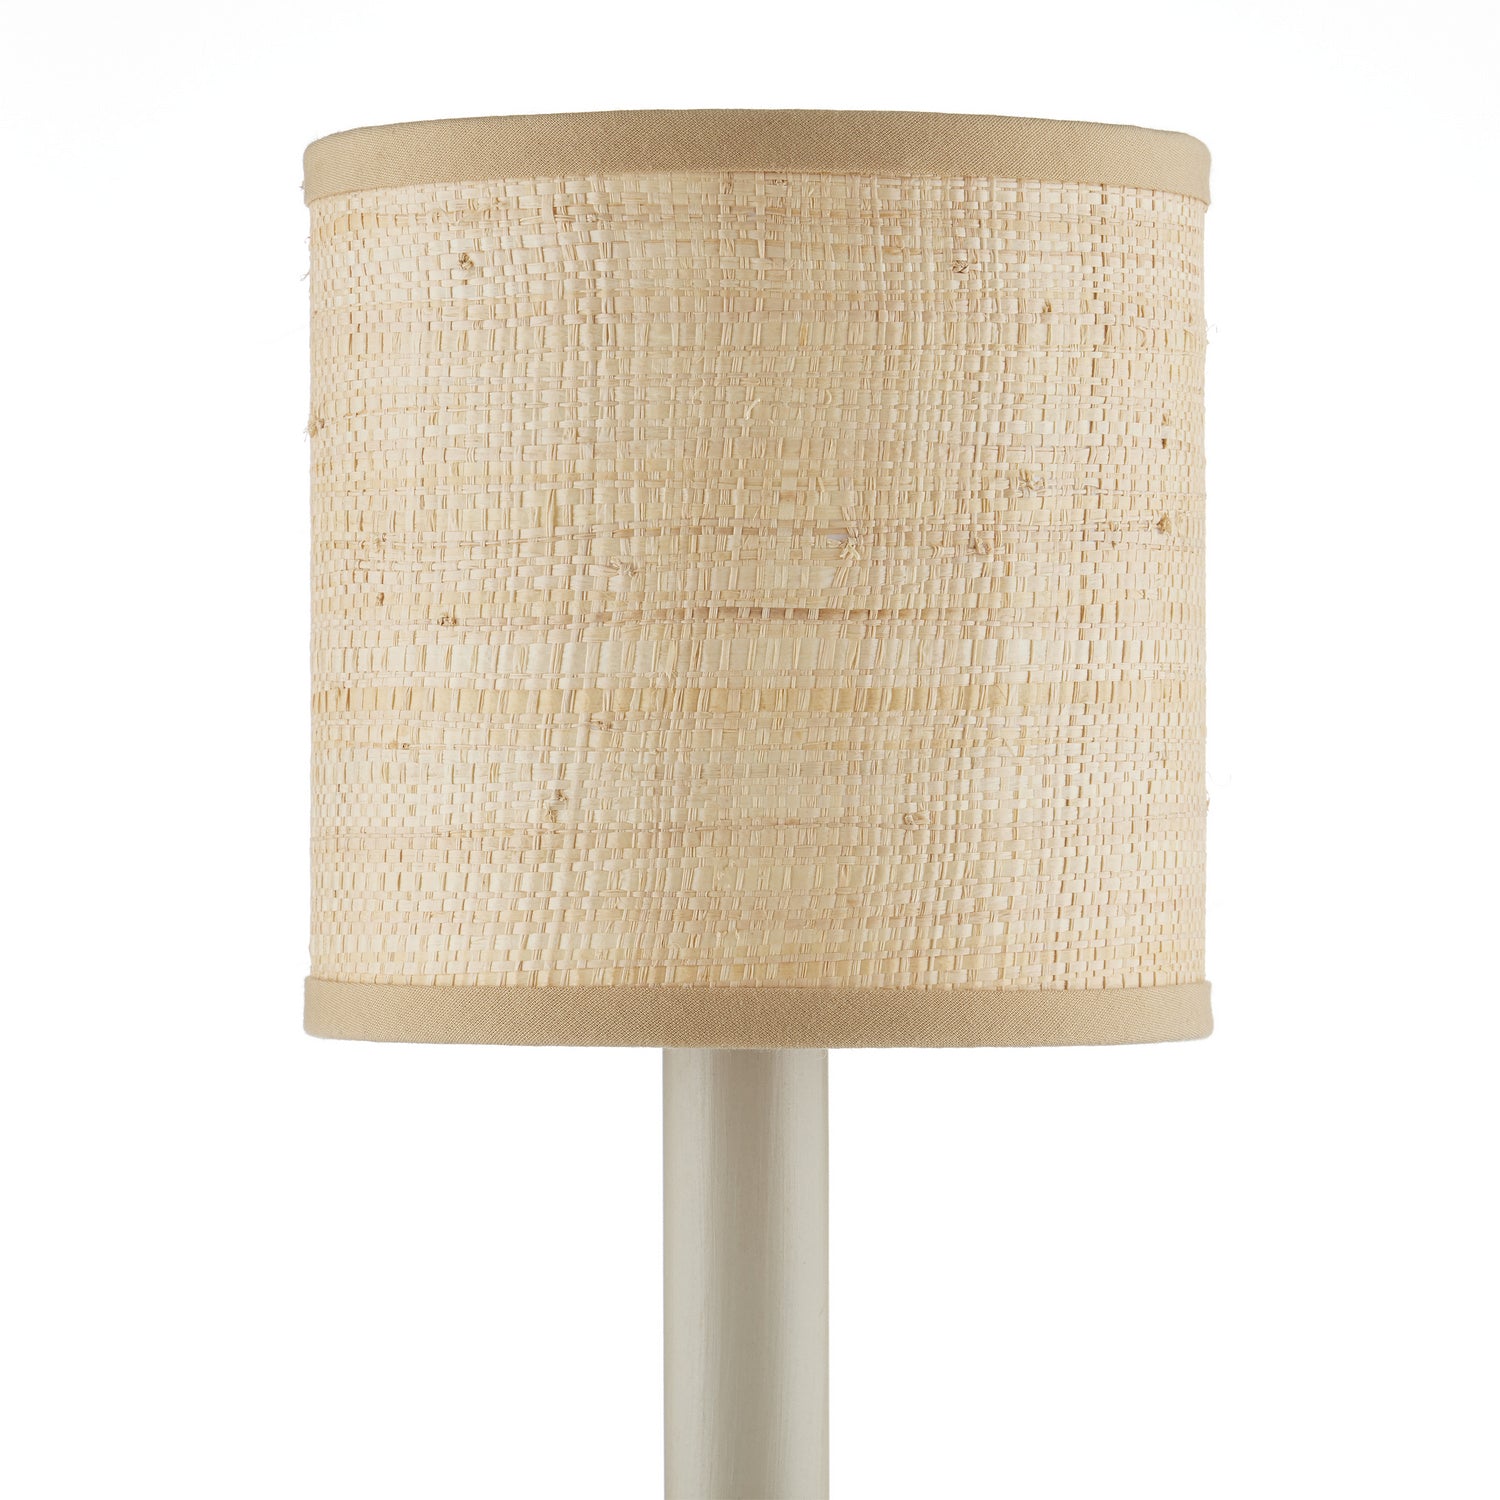 Chandelier Shade in Natural finish